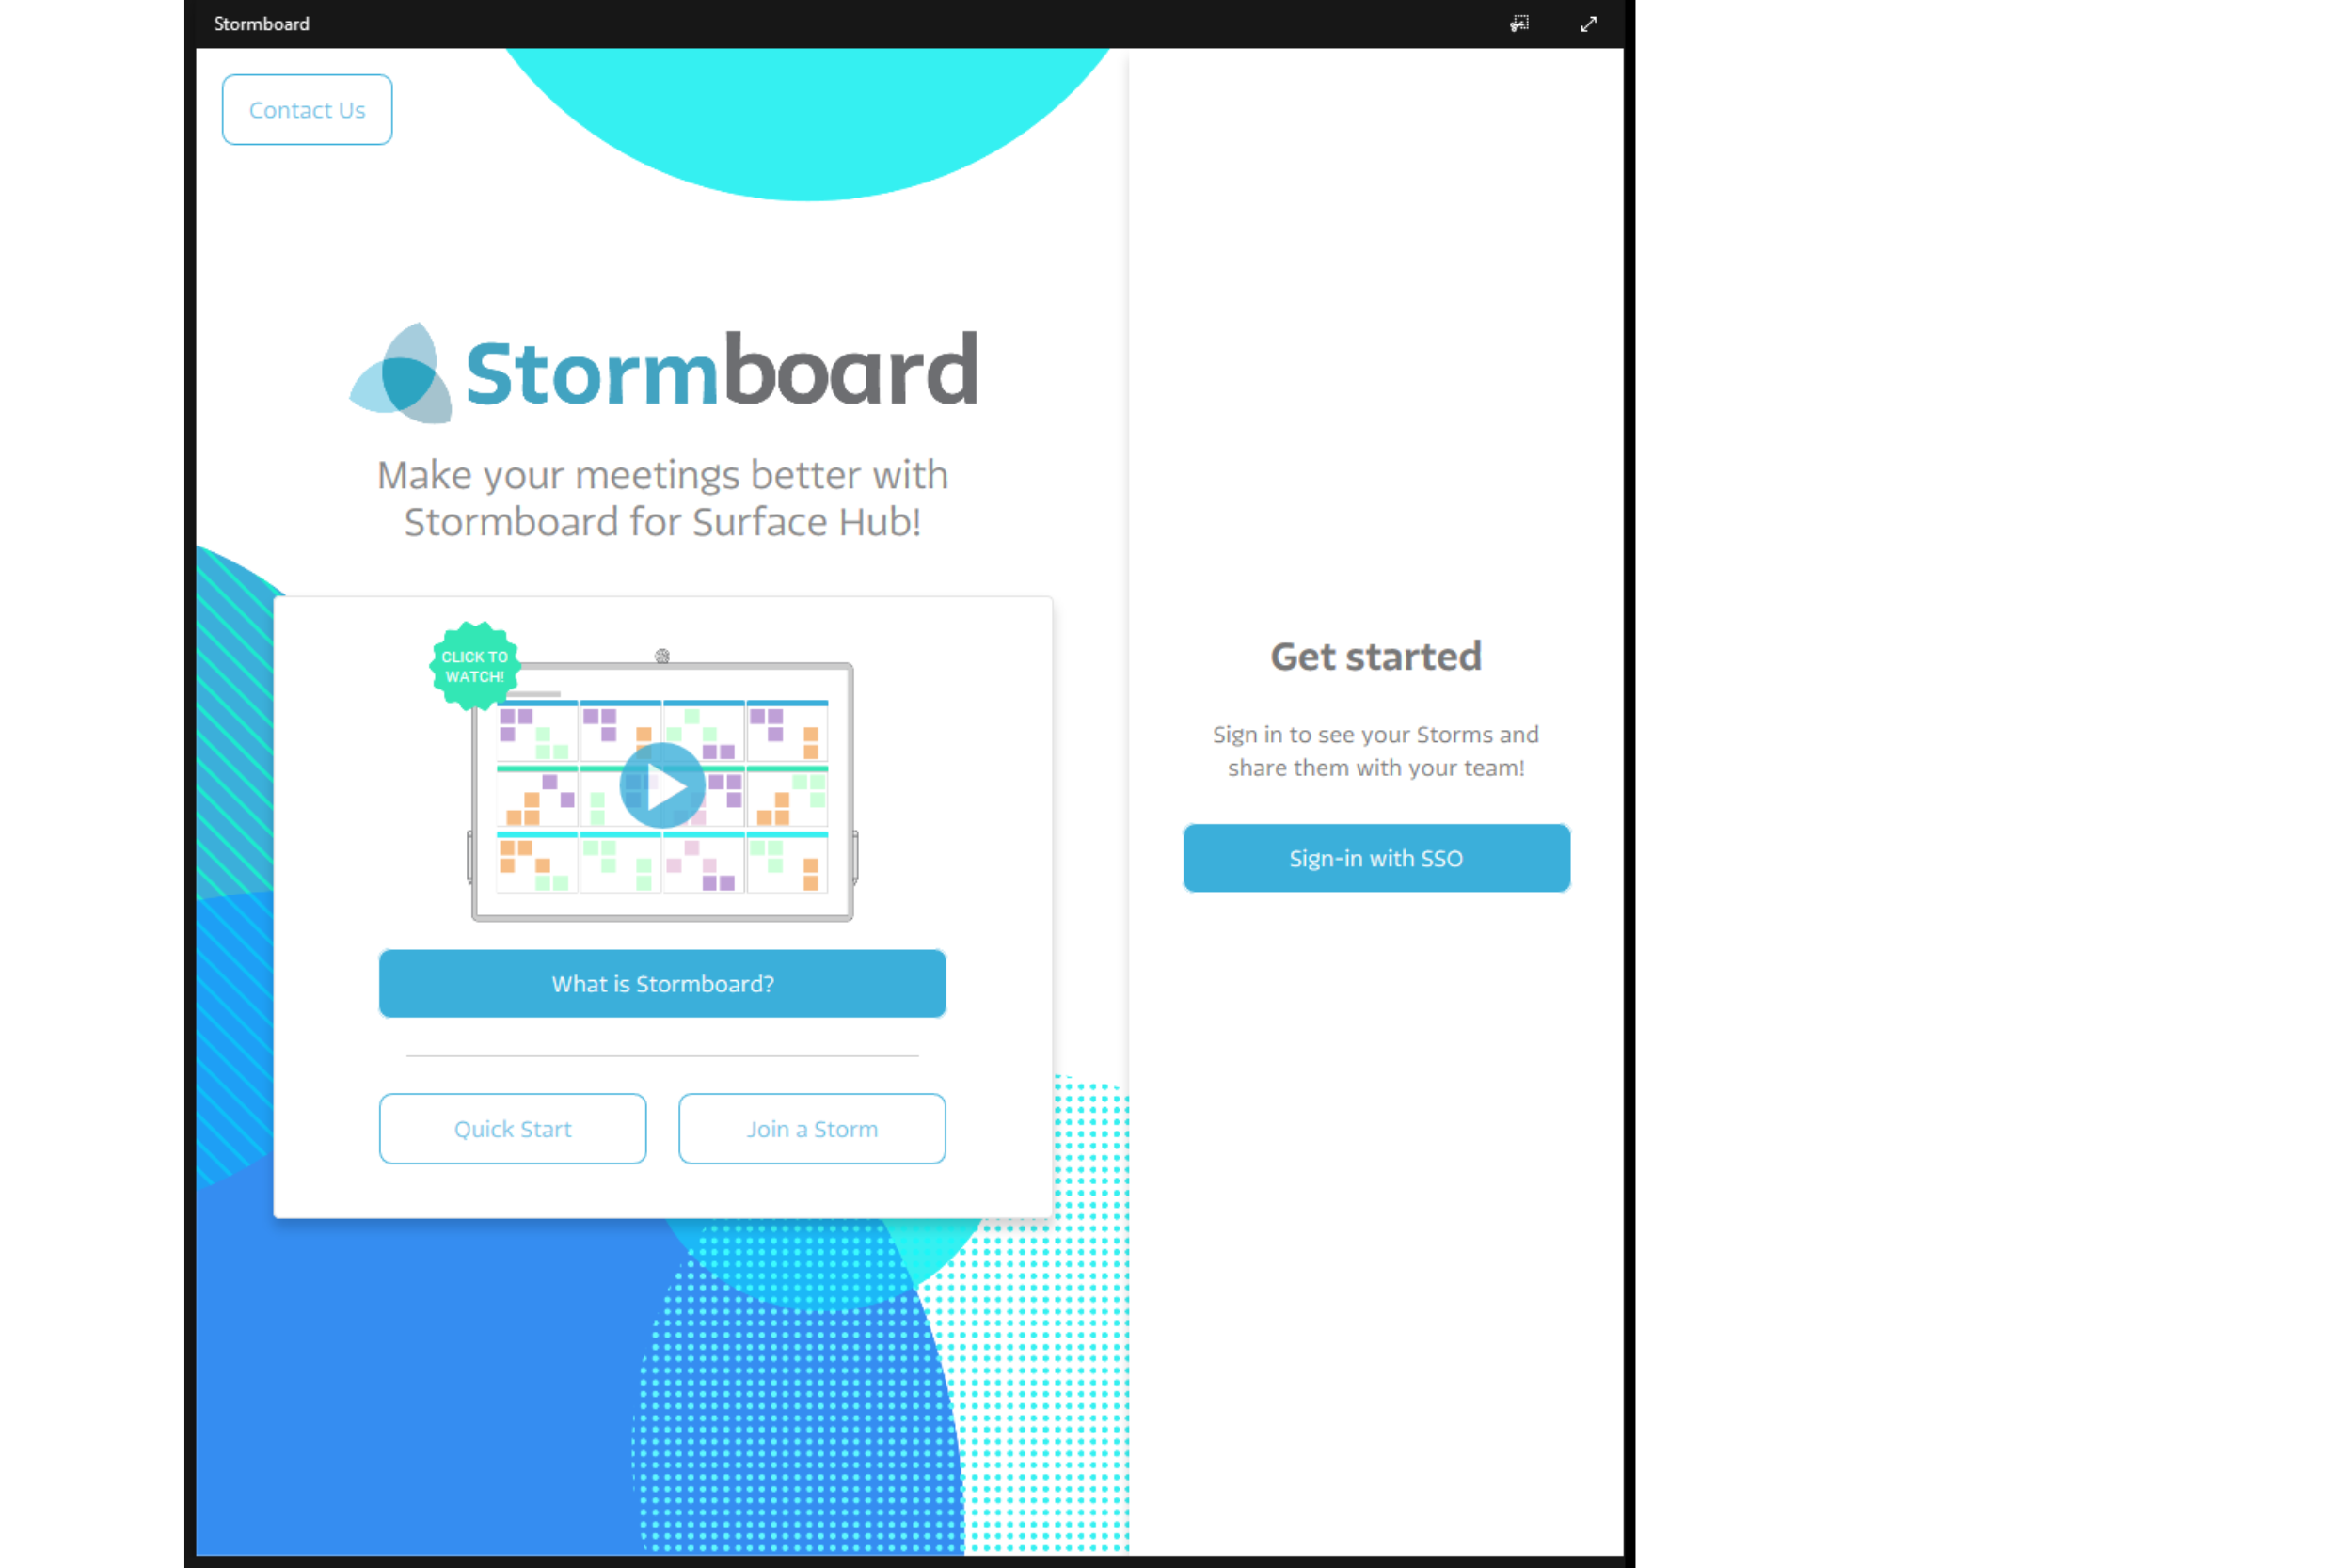 Getting started with Stormboard